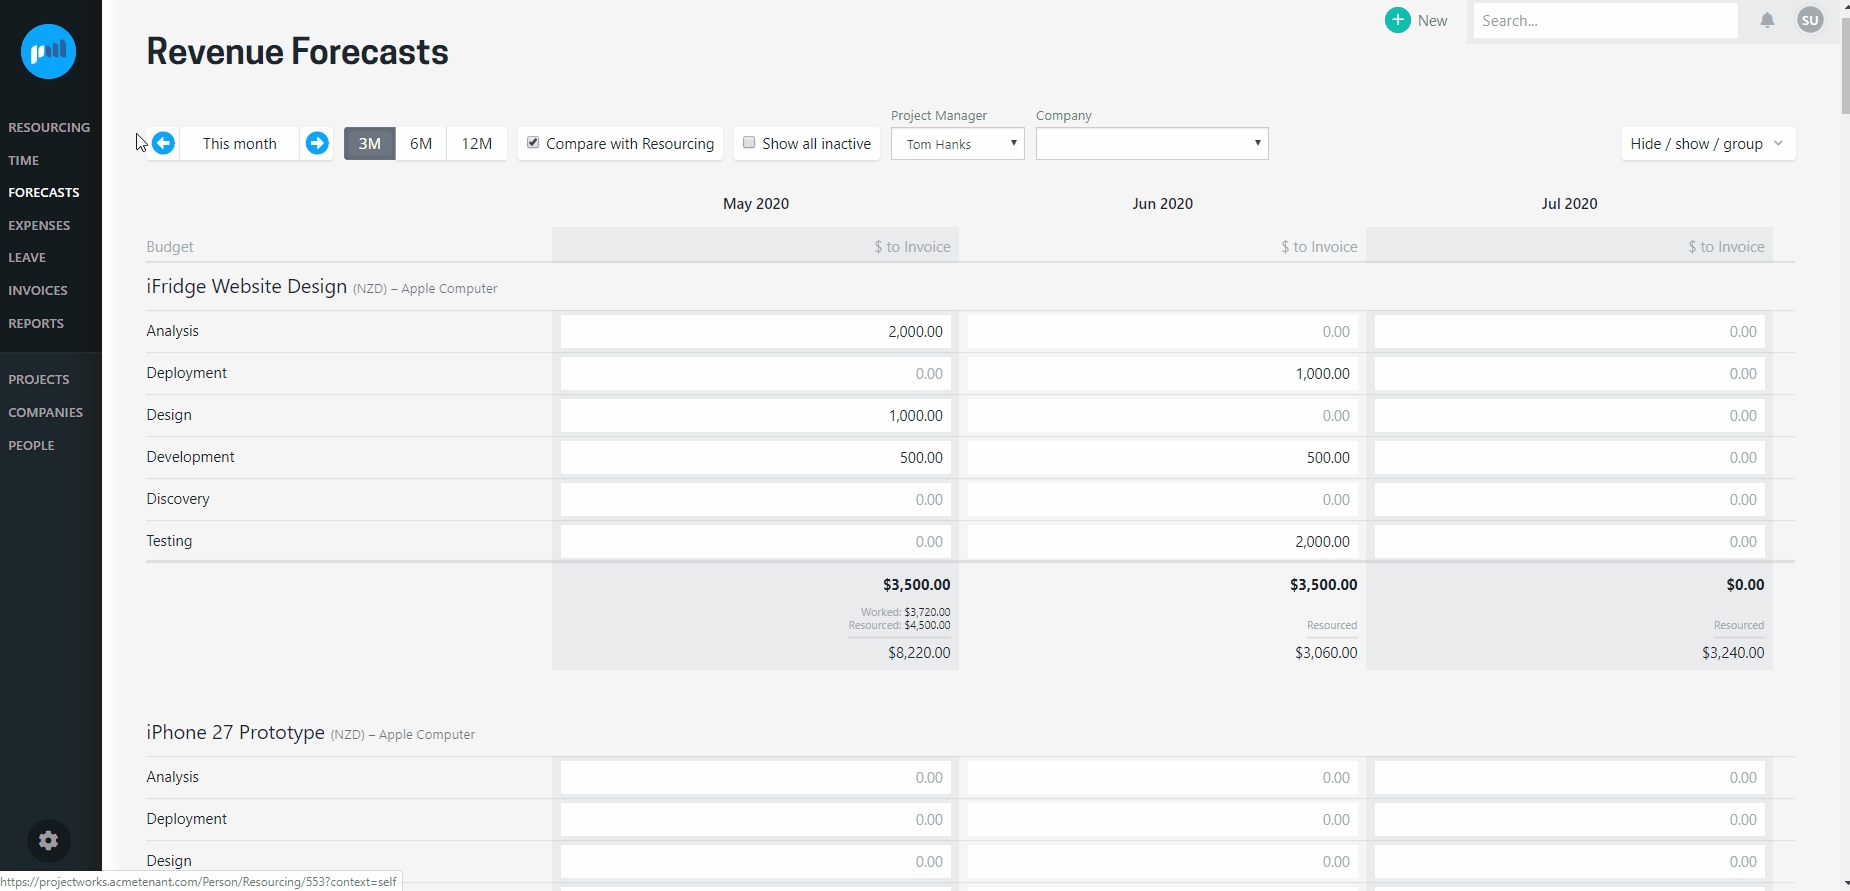 Forecasts page has new layout with new features